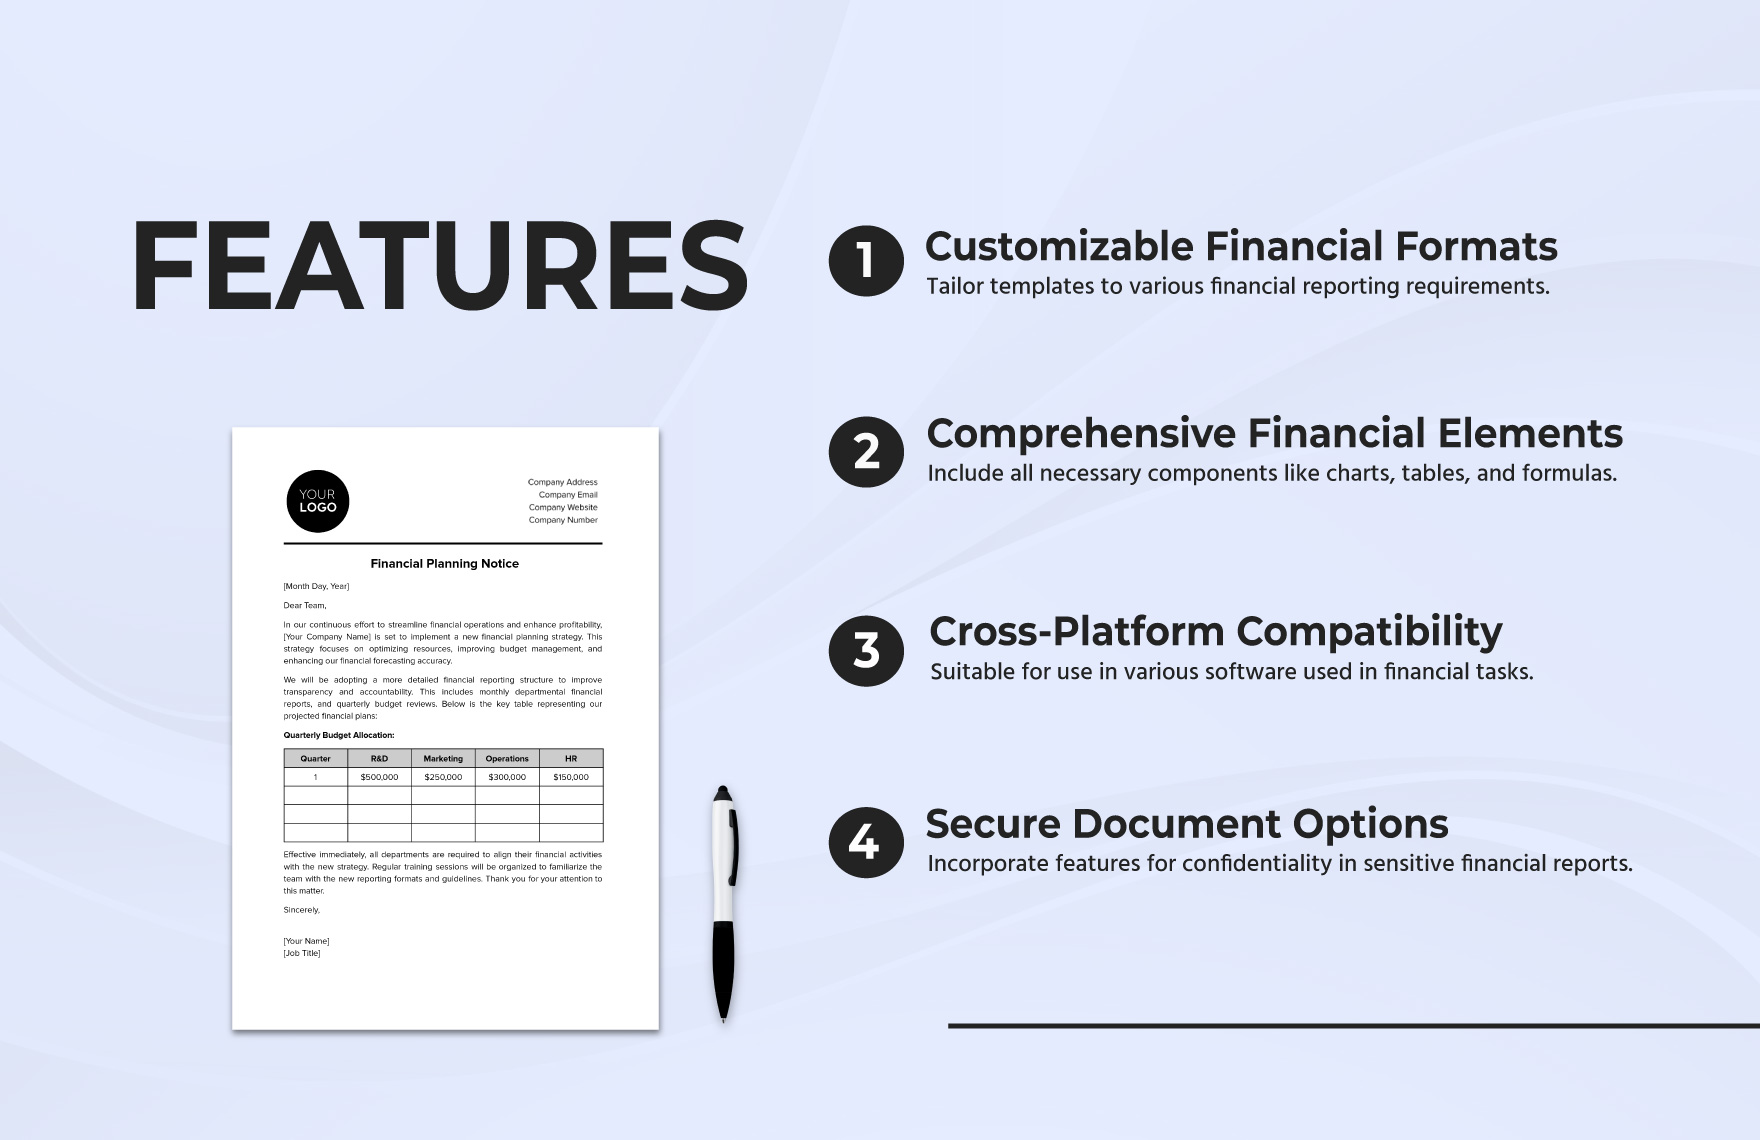 Financial Planning Notice Template